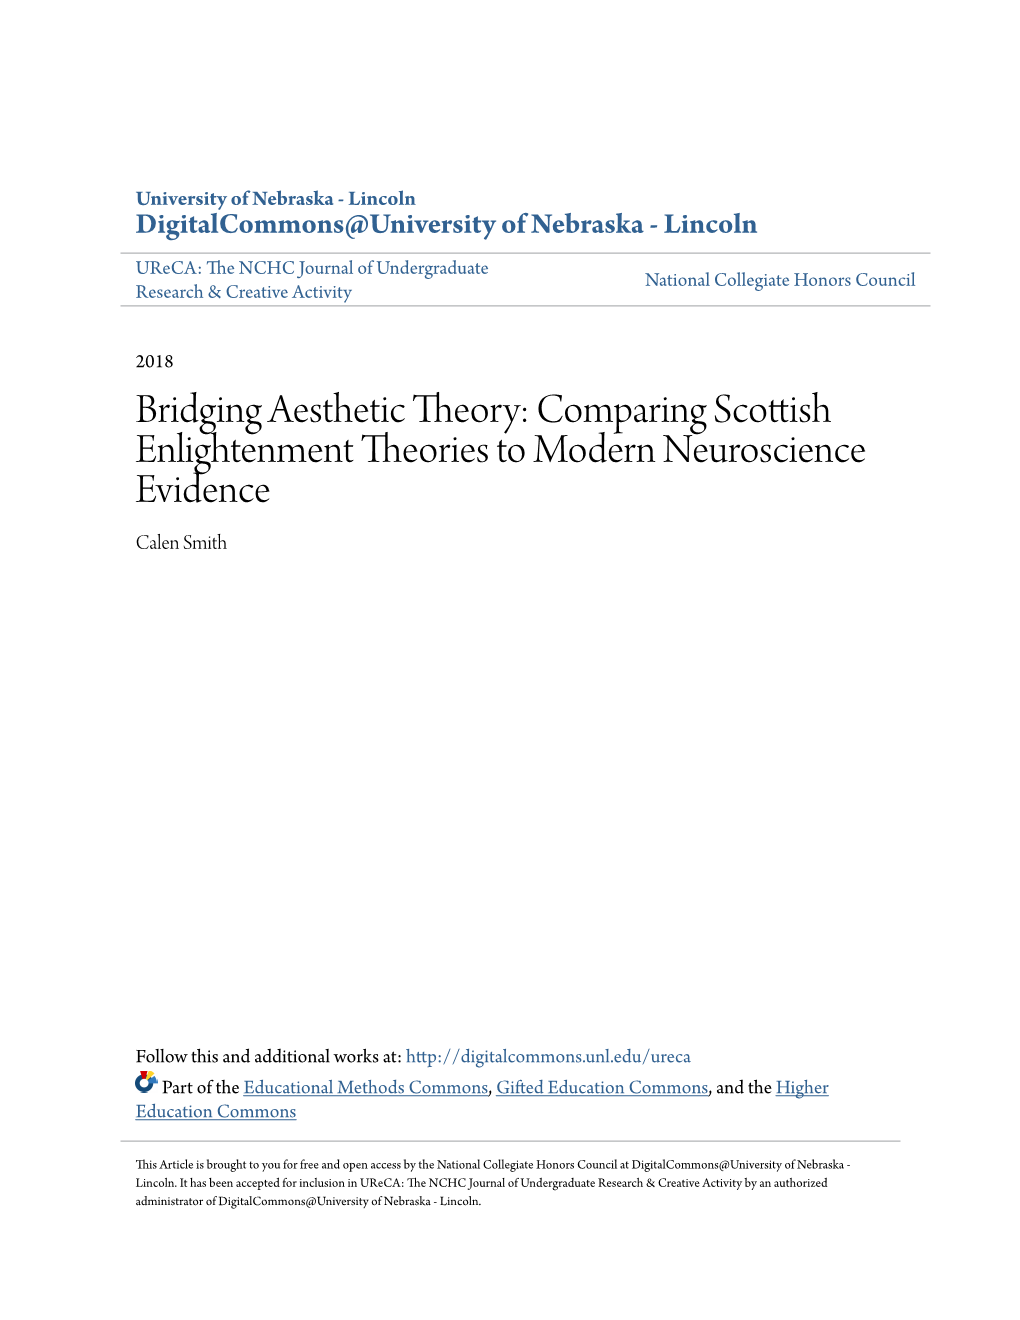 Comparing Scottish Enlightenment Theories to Modern Neuroscience Evidence Calen Smith